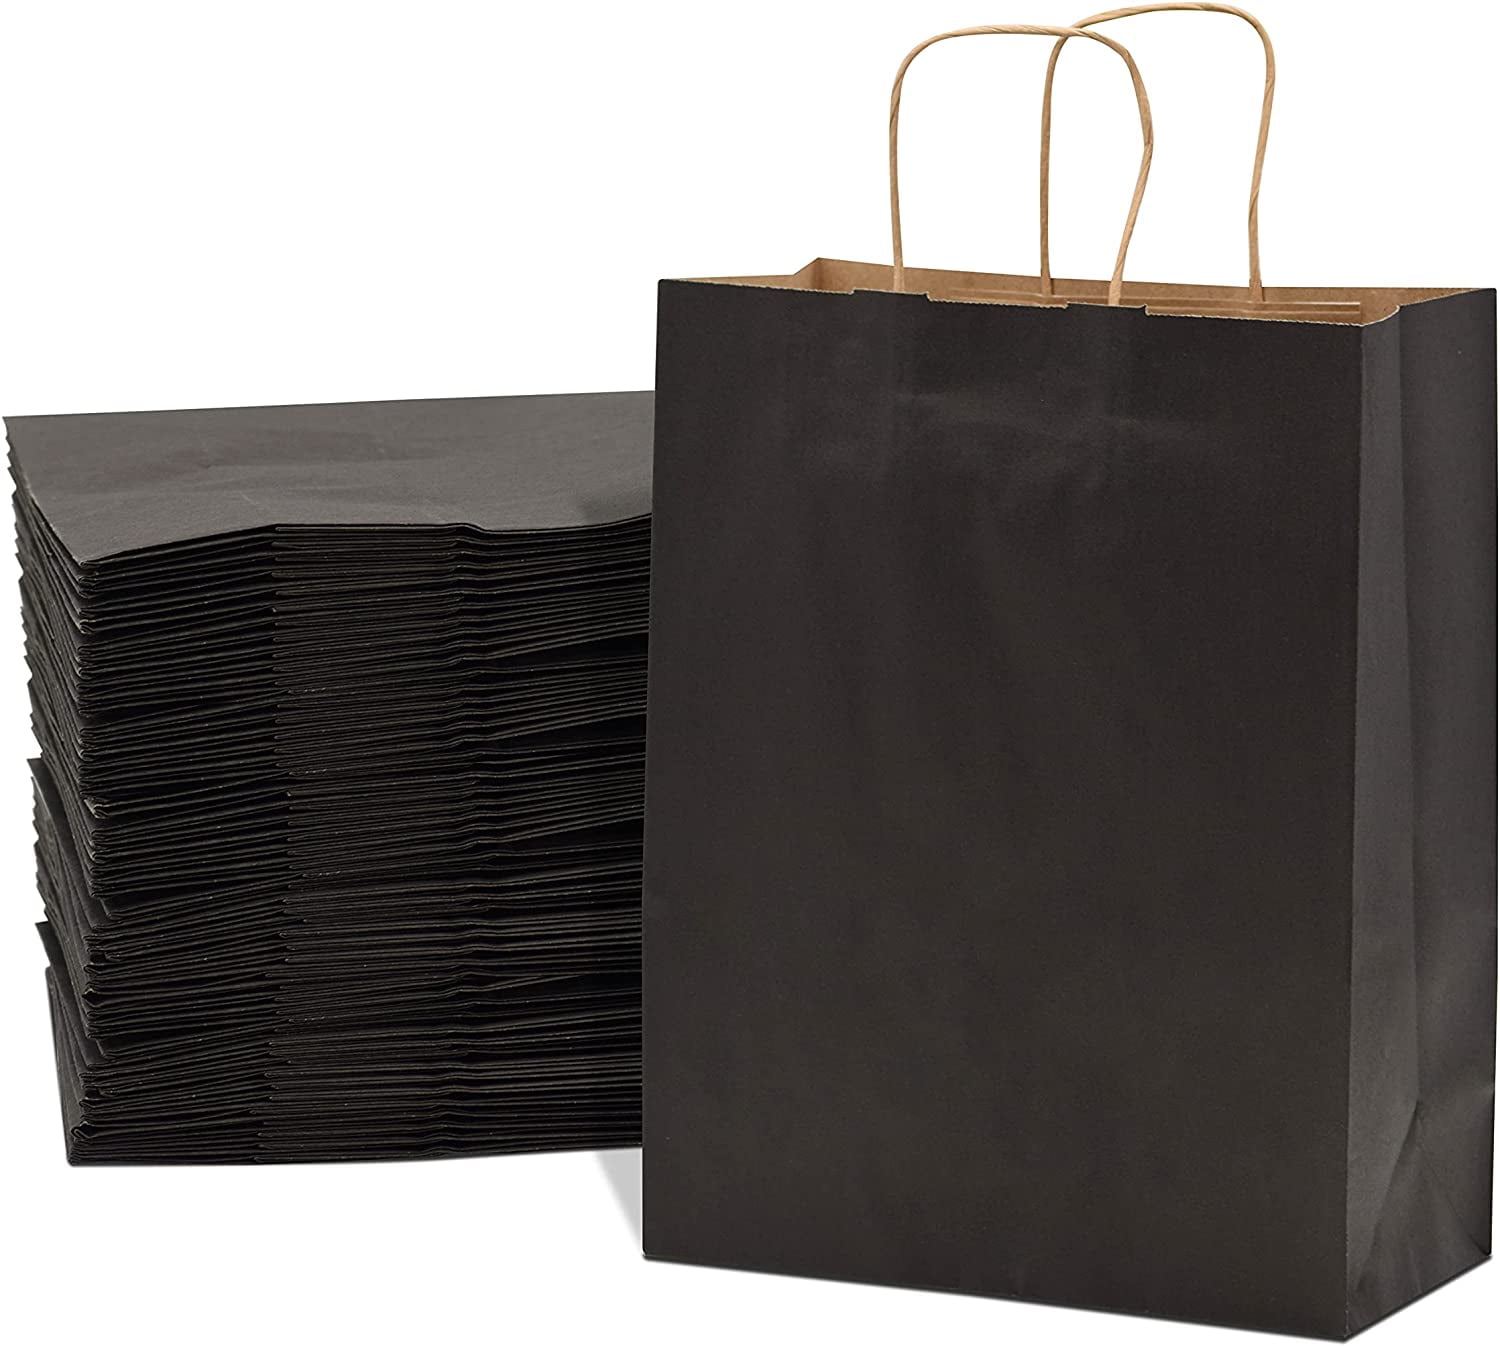 10x5x13 Inch 100 Pack Medium Kraft Paper Shopping Bags Small Business Black Gift Bags with Handles Birthdays Merchandise Retail Stores Jewelry Party Favors Craft Totes in Bulk for Boutiques 